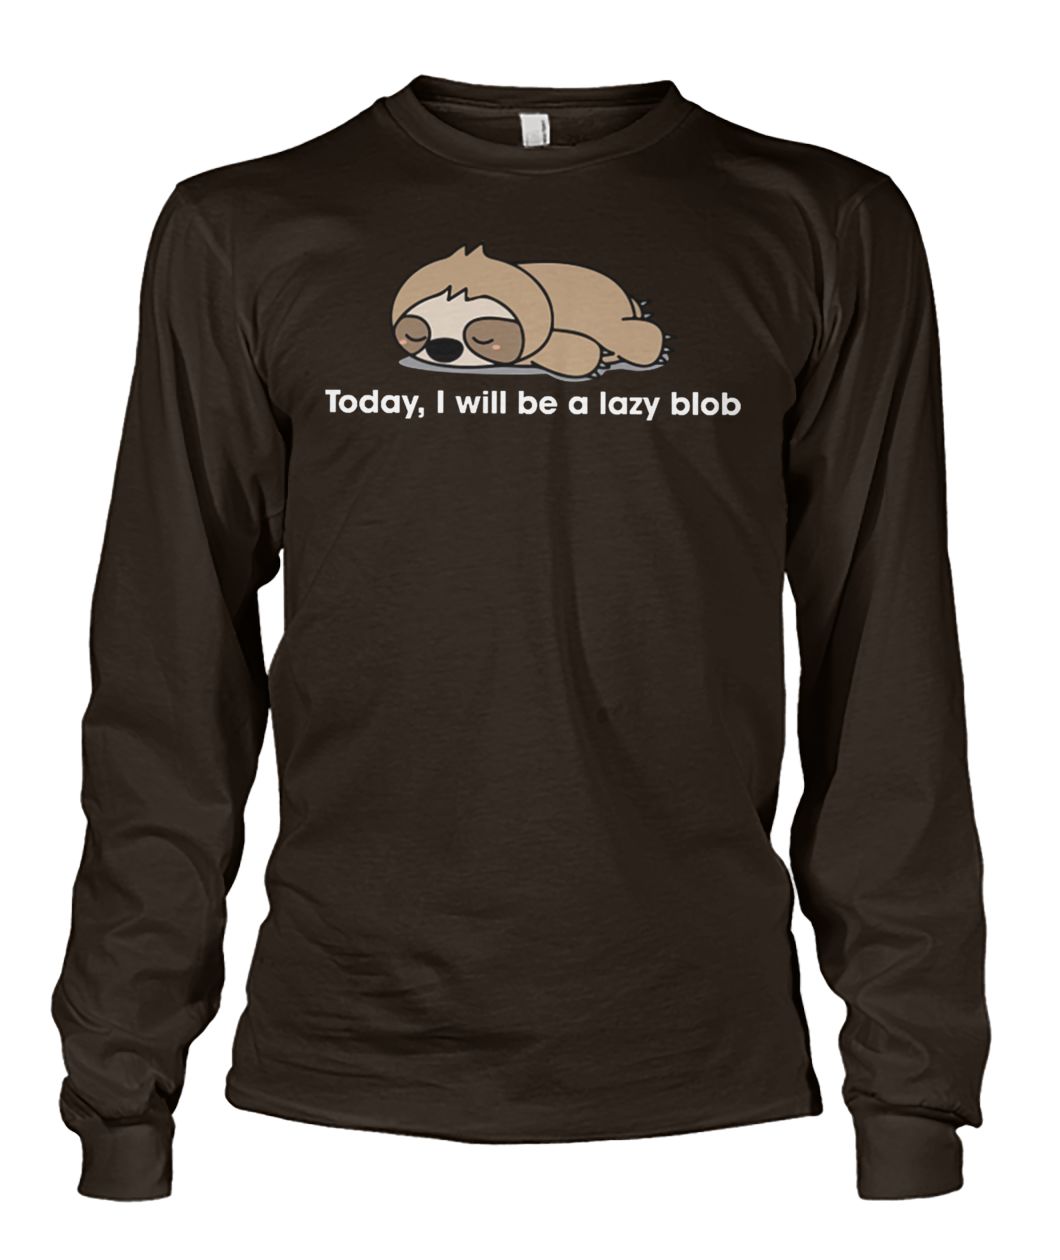 Sloth to day I will be a lady blob unisex long sleeve